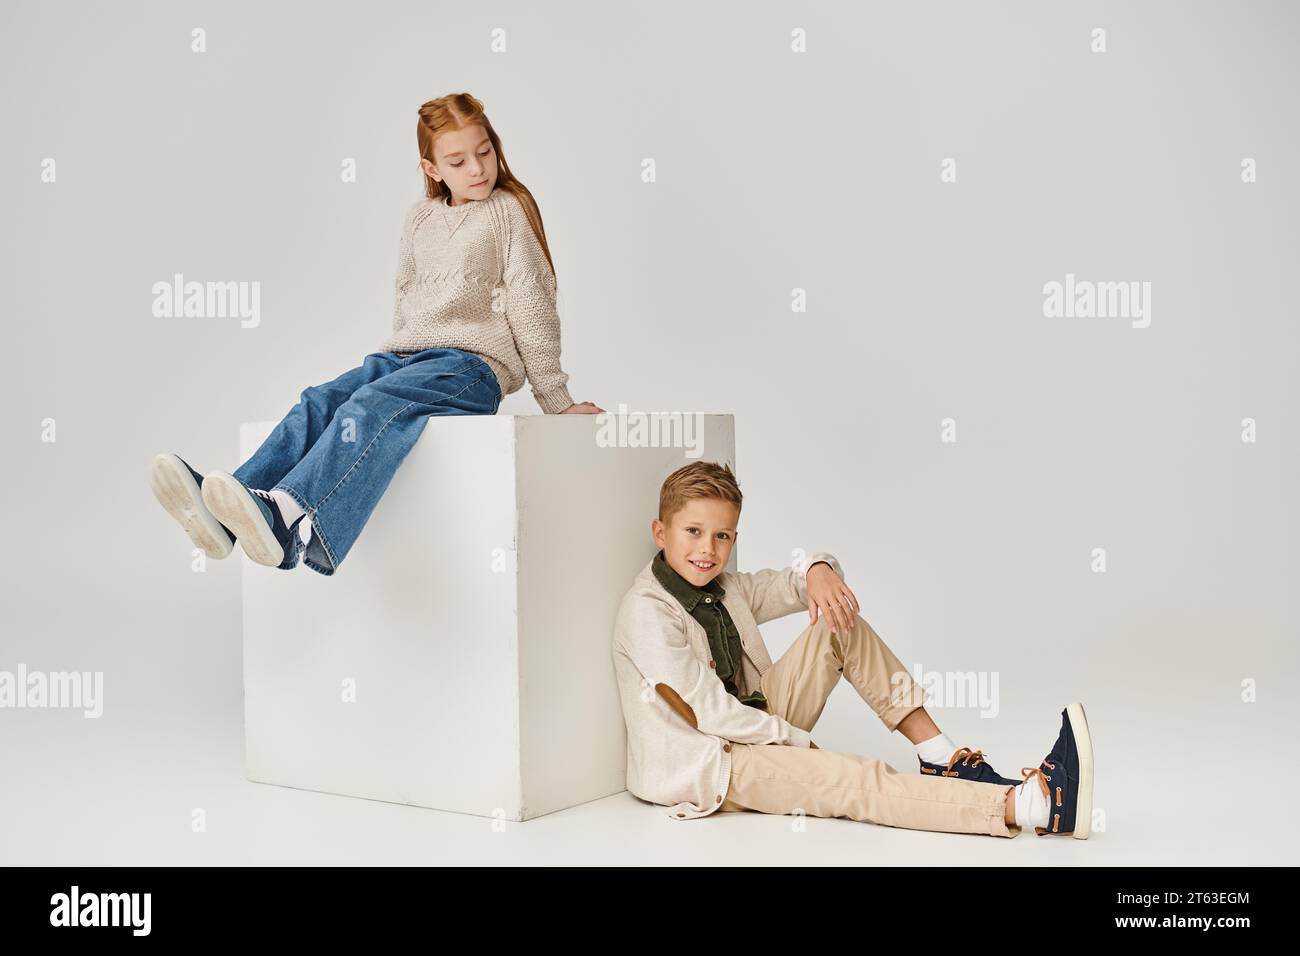 red haired little girl sitting on cube and looking at smiley preteen boy sitting on floor, fashion Stock Photo